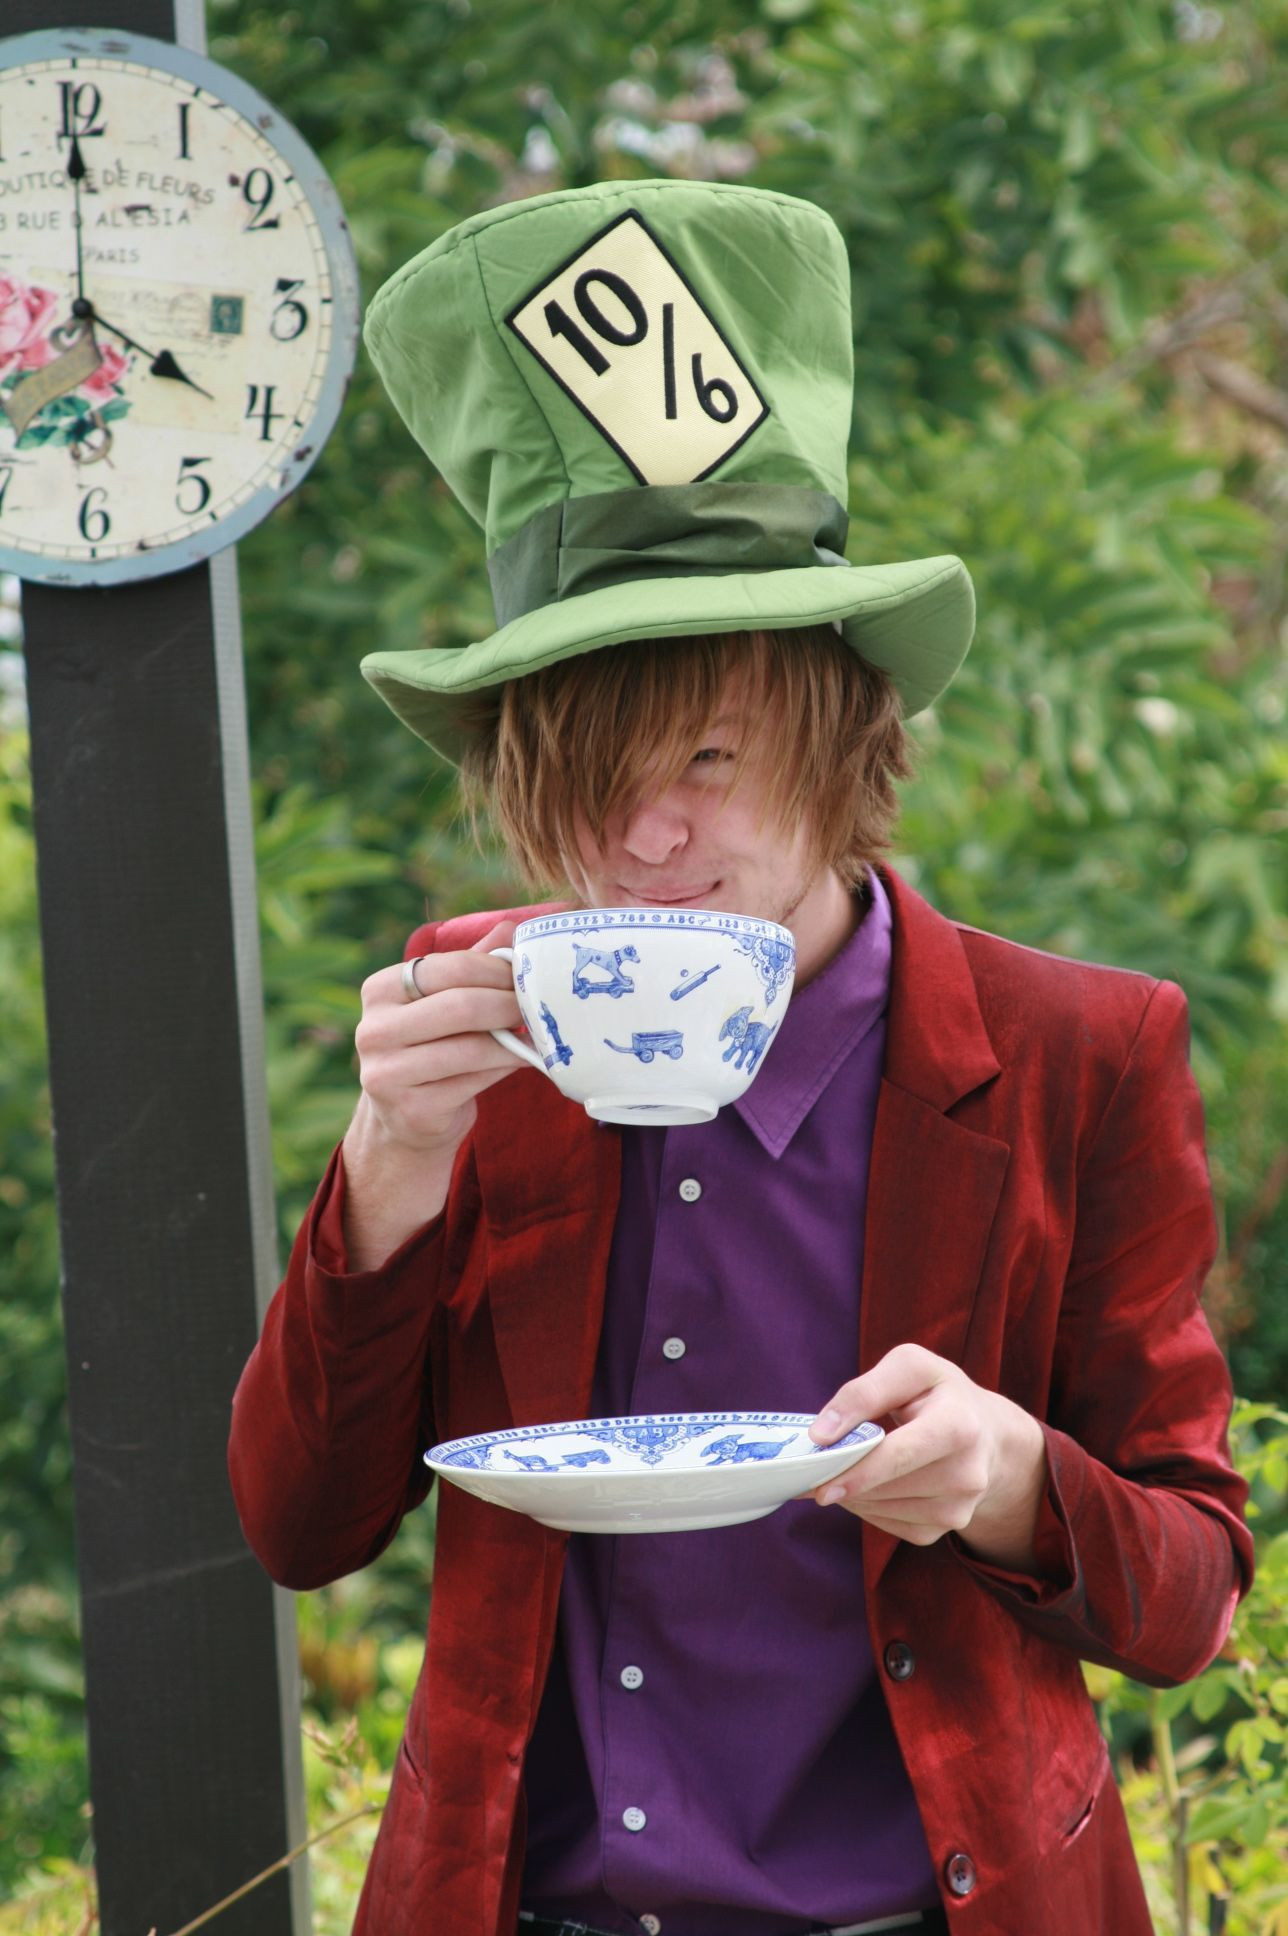 Tea Party Costume Ideas
 MaD HaTTeR Easter Tea Party Easter Tea